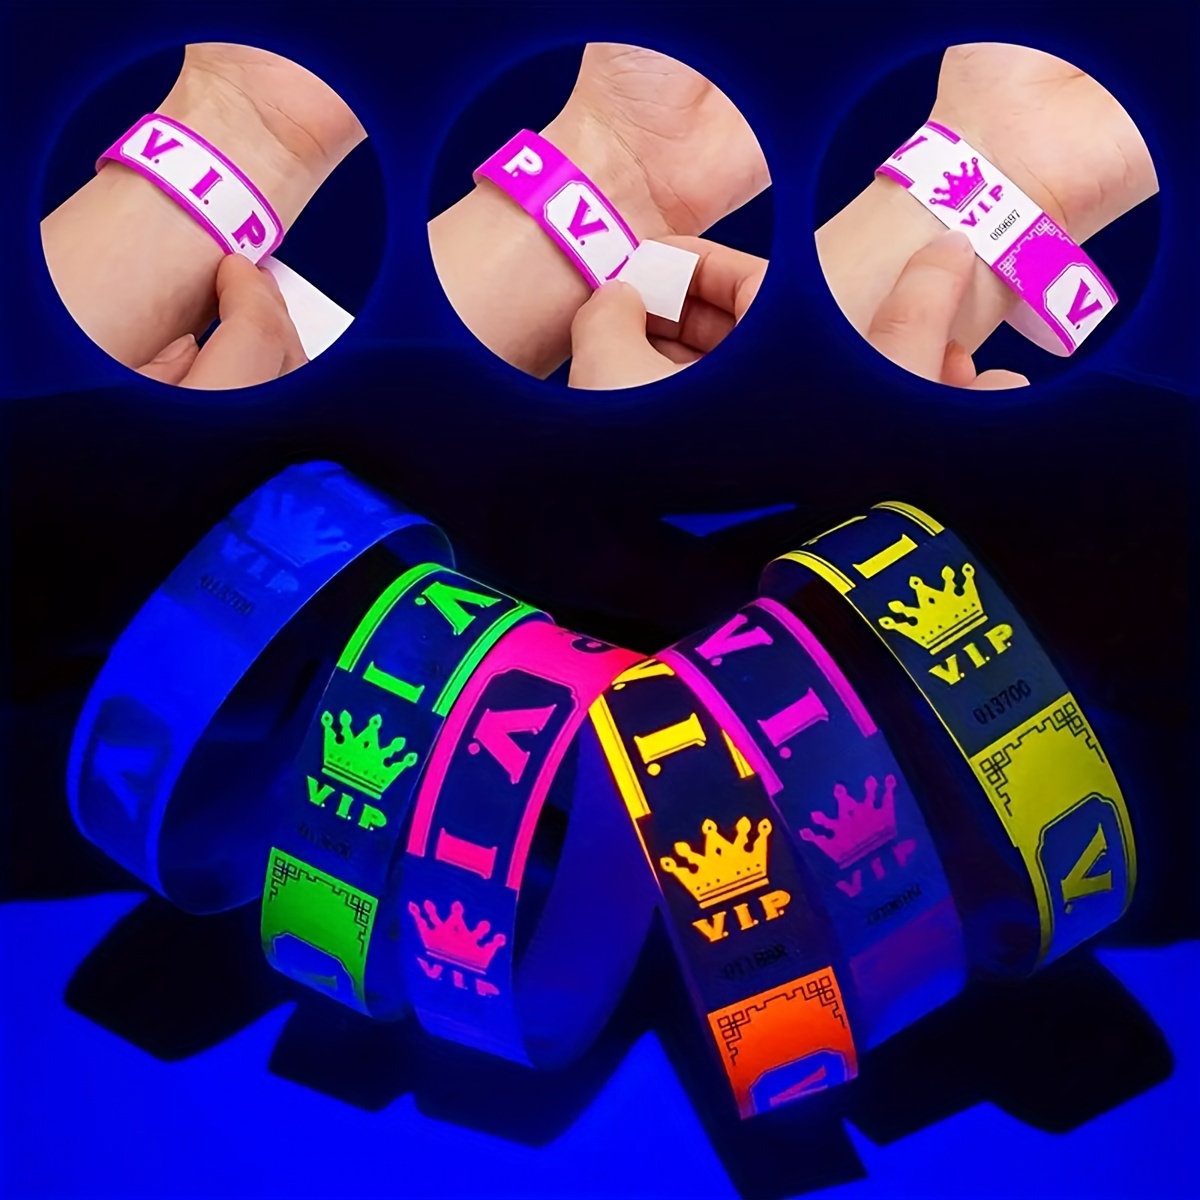 

100pcs Neon Glow Vip Wristbands For Events - Waterproof, Lightweight, And Perfect For Parties, Clubs, Parks, Concerts, And Festivals